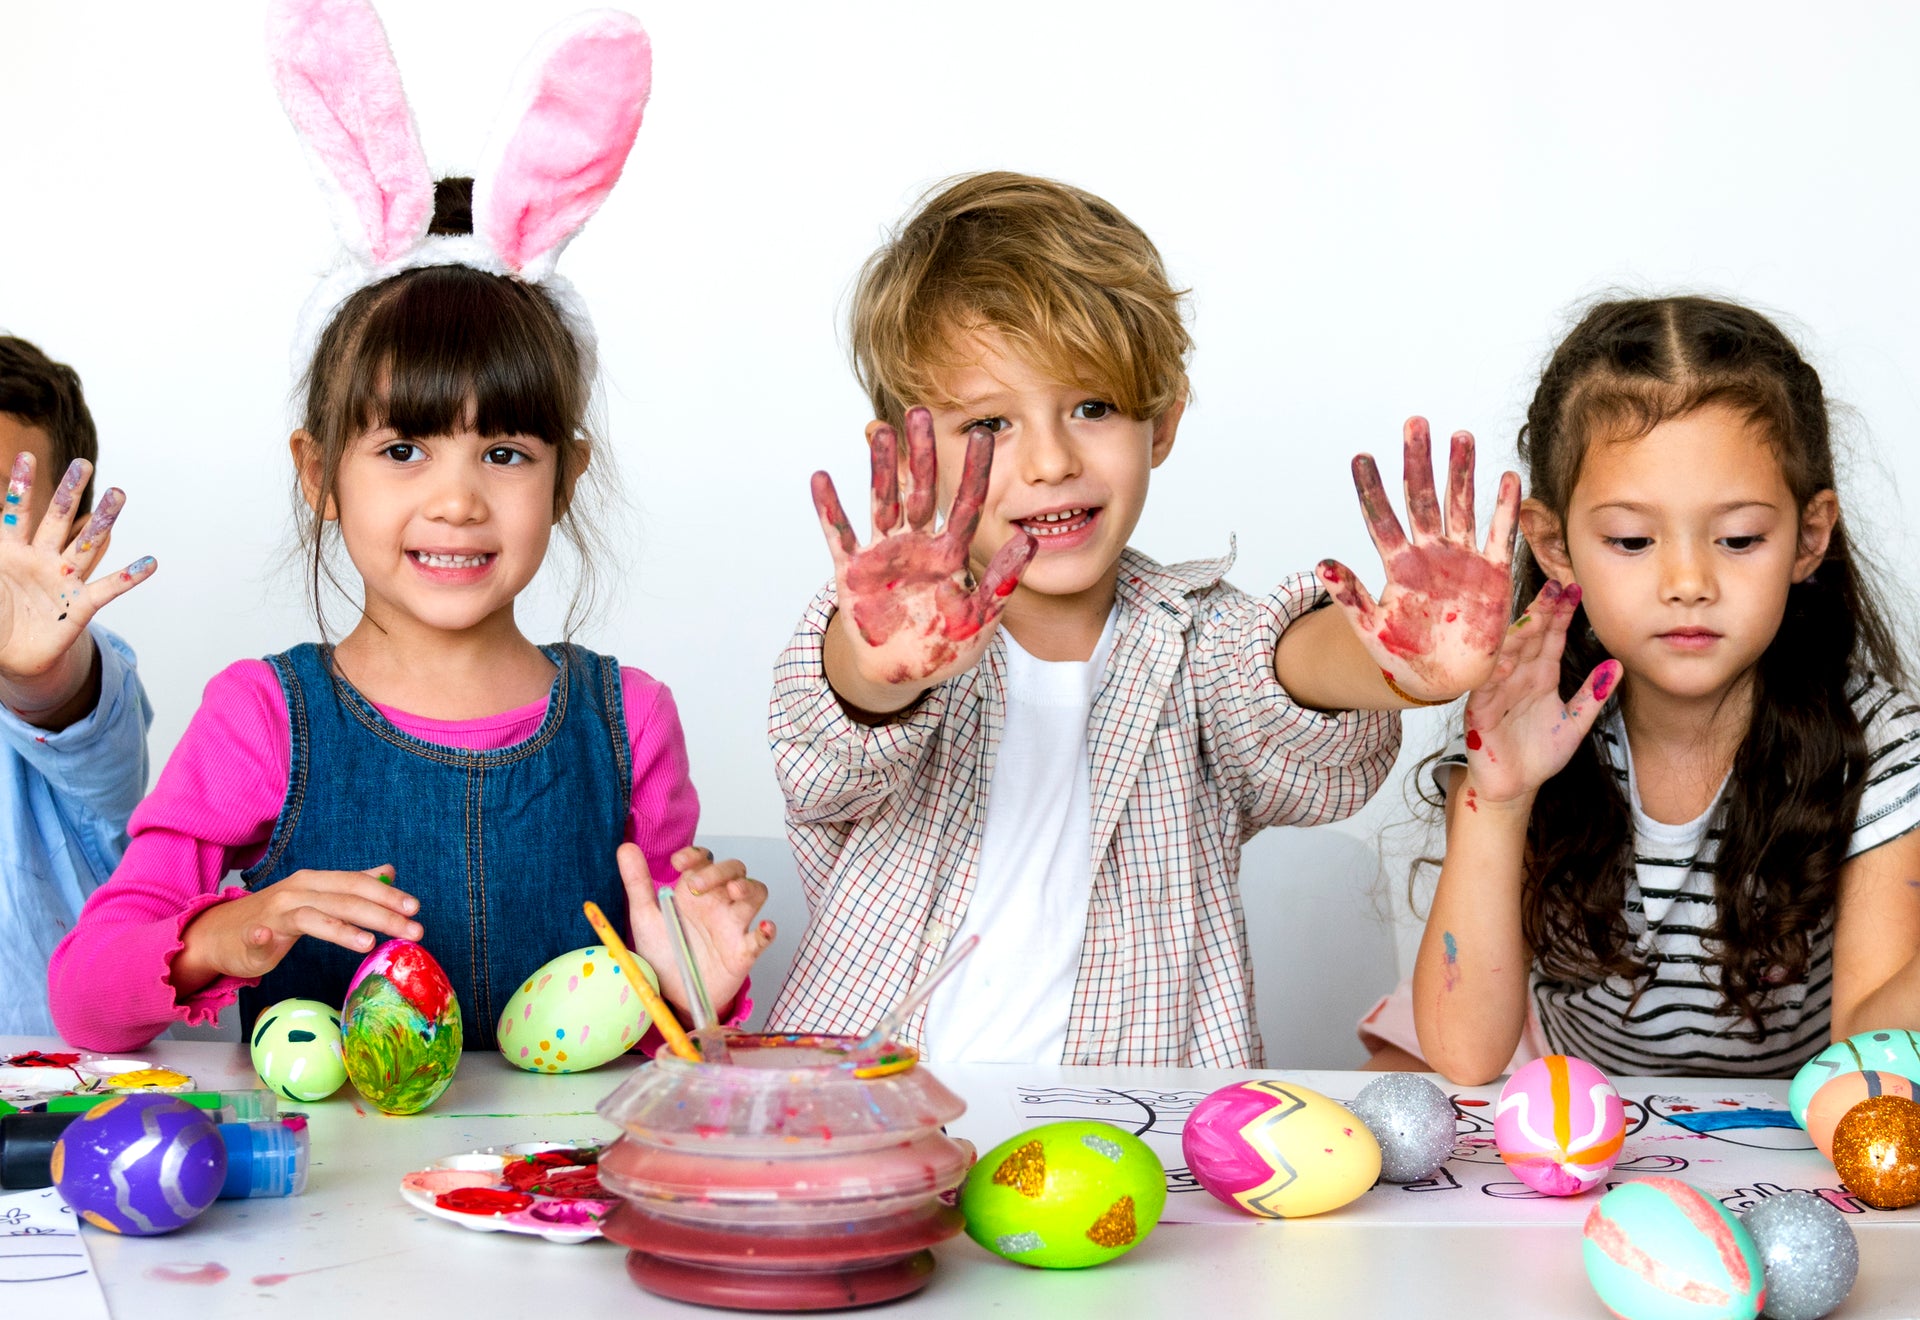 Crafty Easter Egg Decorating Ideas for Kids of All Ages